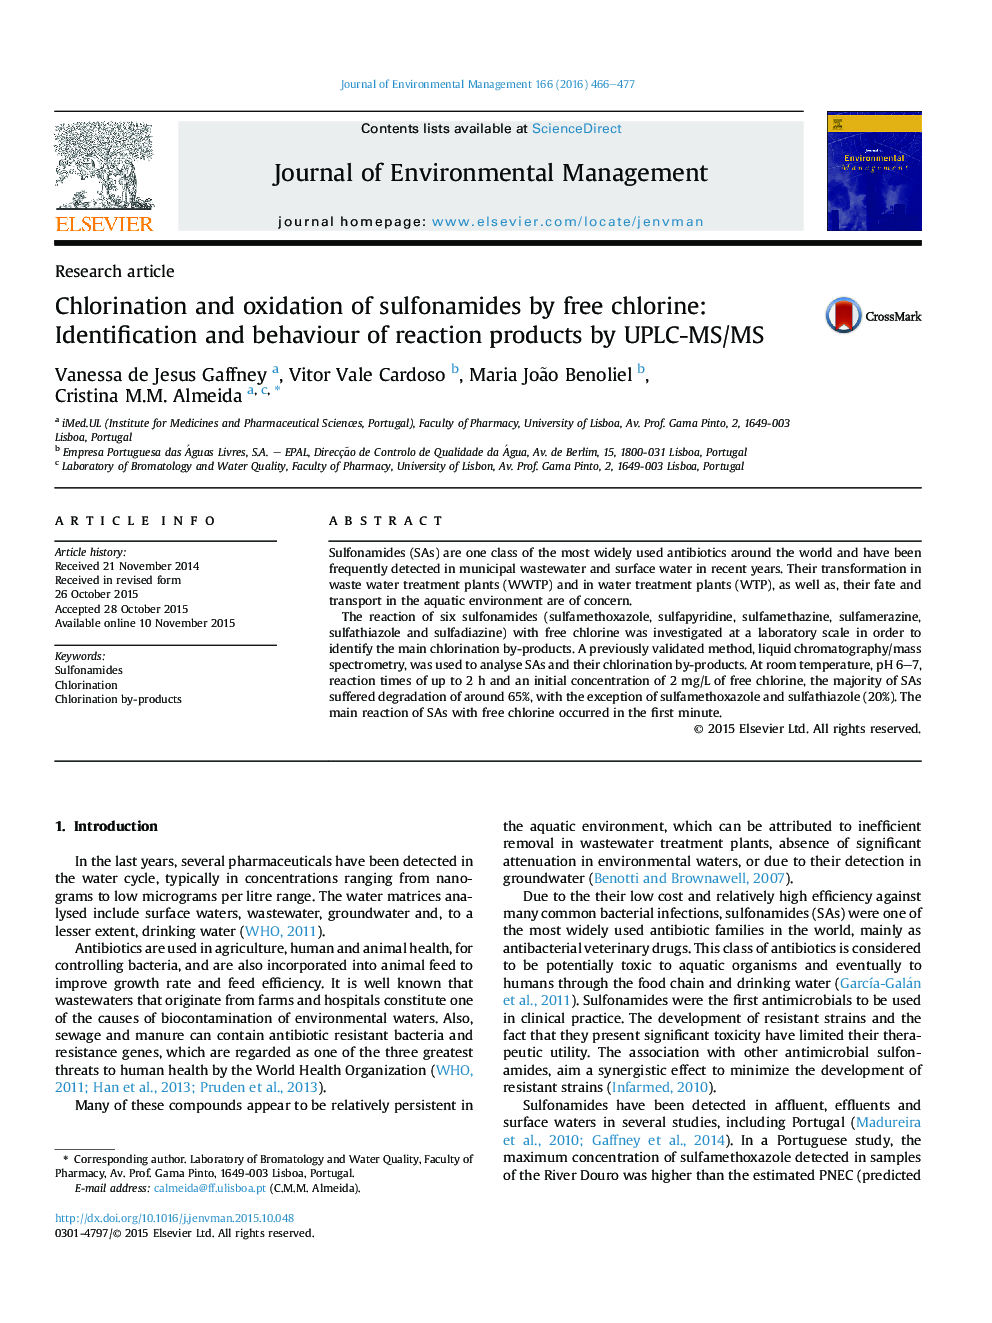 Chlorination and oxidation of sulfonamides by free chlorine: Identification and behaviour of reaction products by UPLC-MS/MS